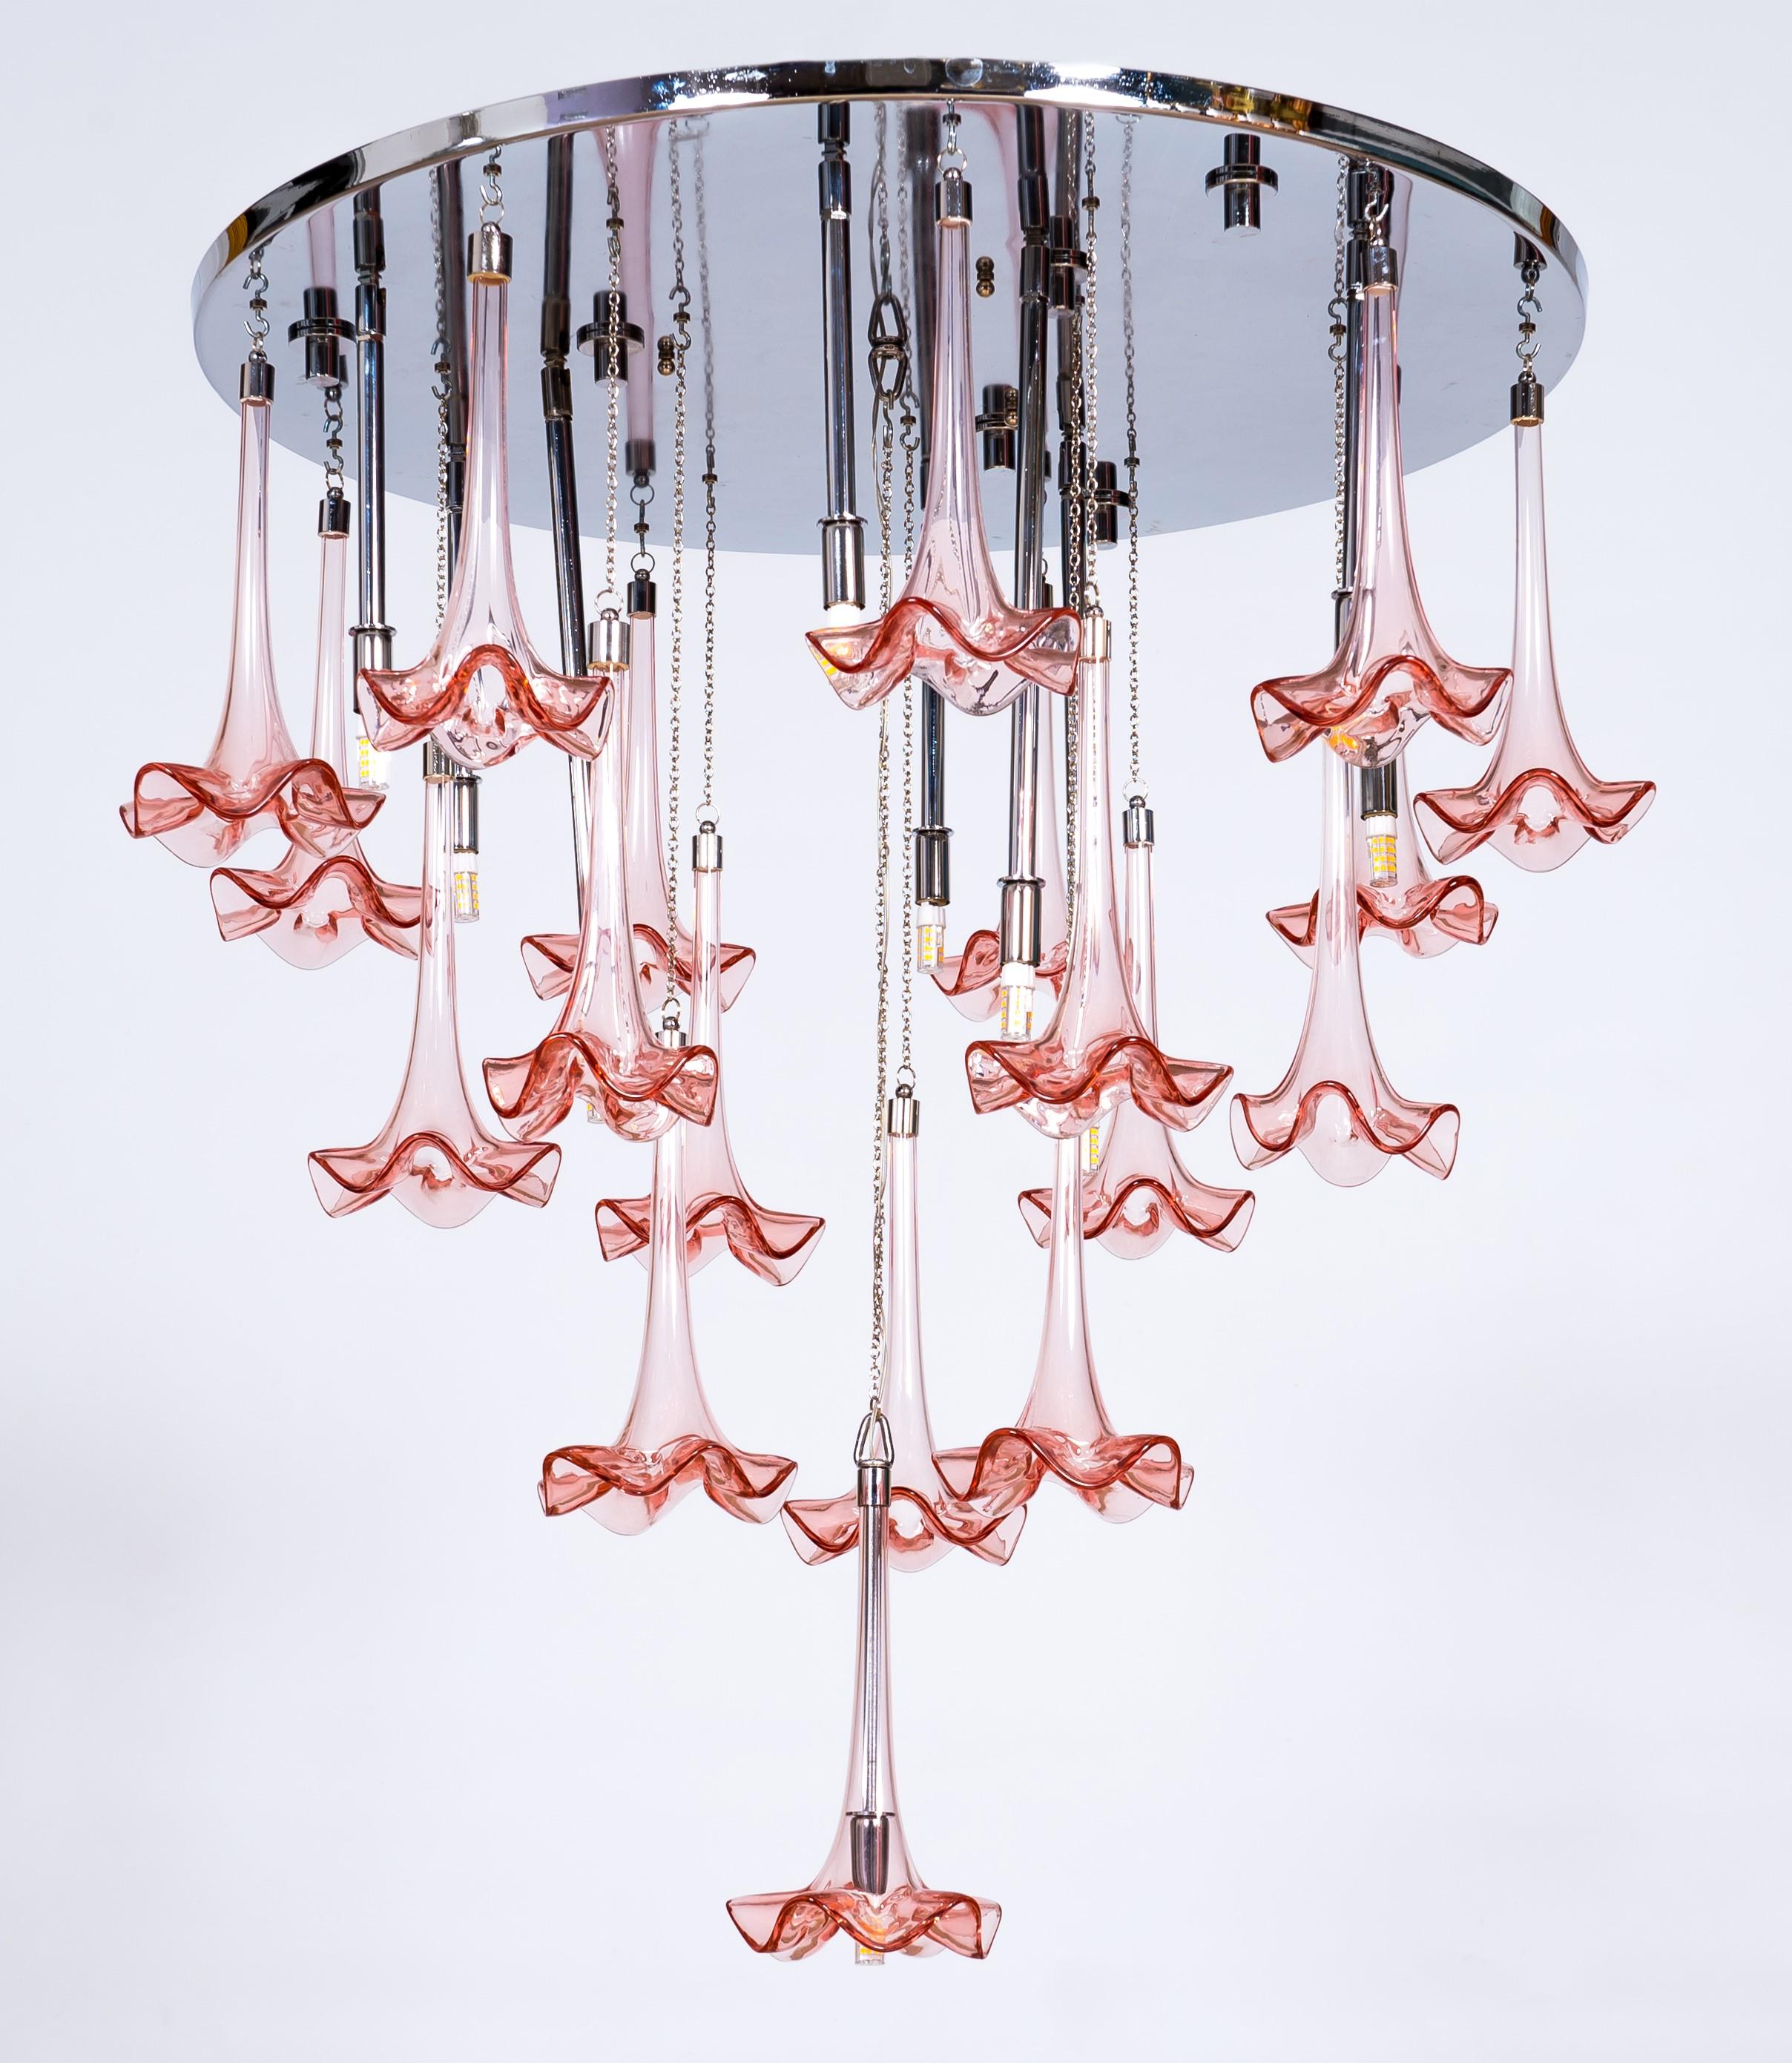 LED Murano Glass Modern Flush Mount with Pink Flowers by Giovanni Dalla Fina
Beautiful and stylized chandelier, with a cascade of pink flowers hanging from a circular chromed shining frame which reflects the light. The flowers edges are wavy and